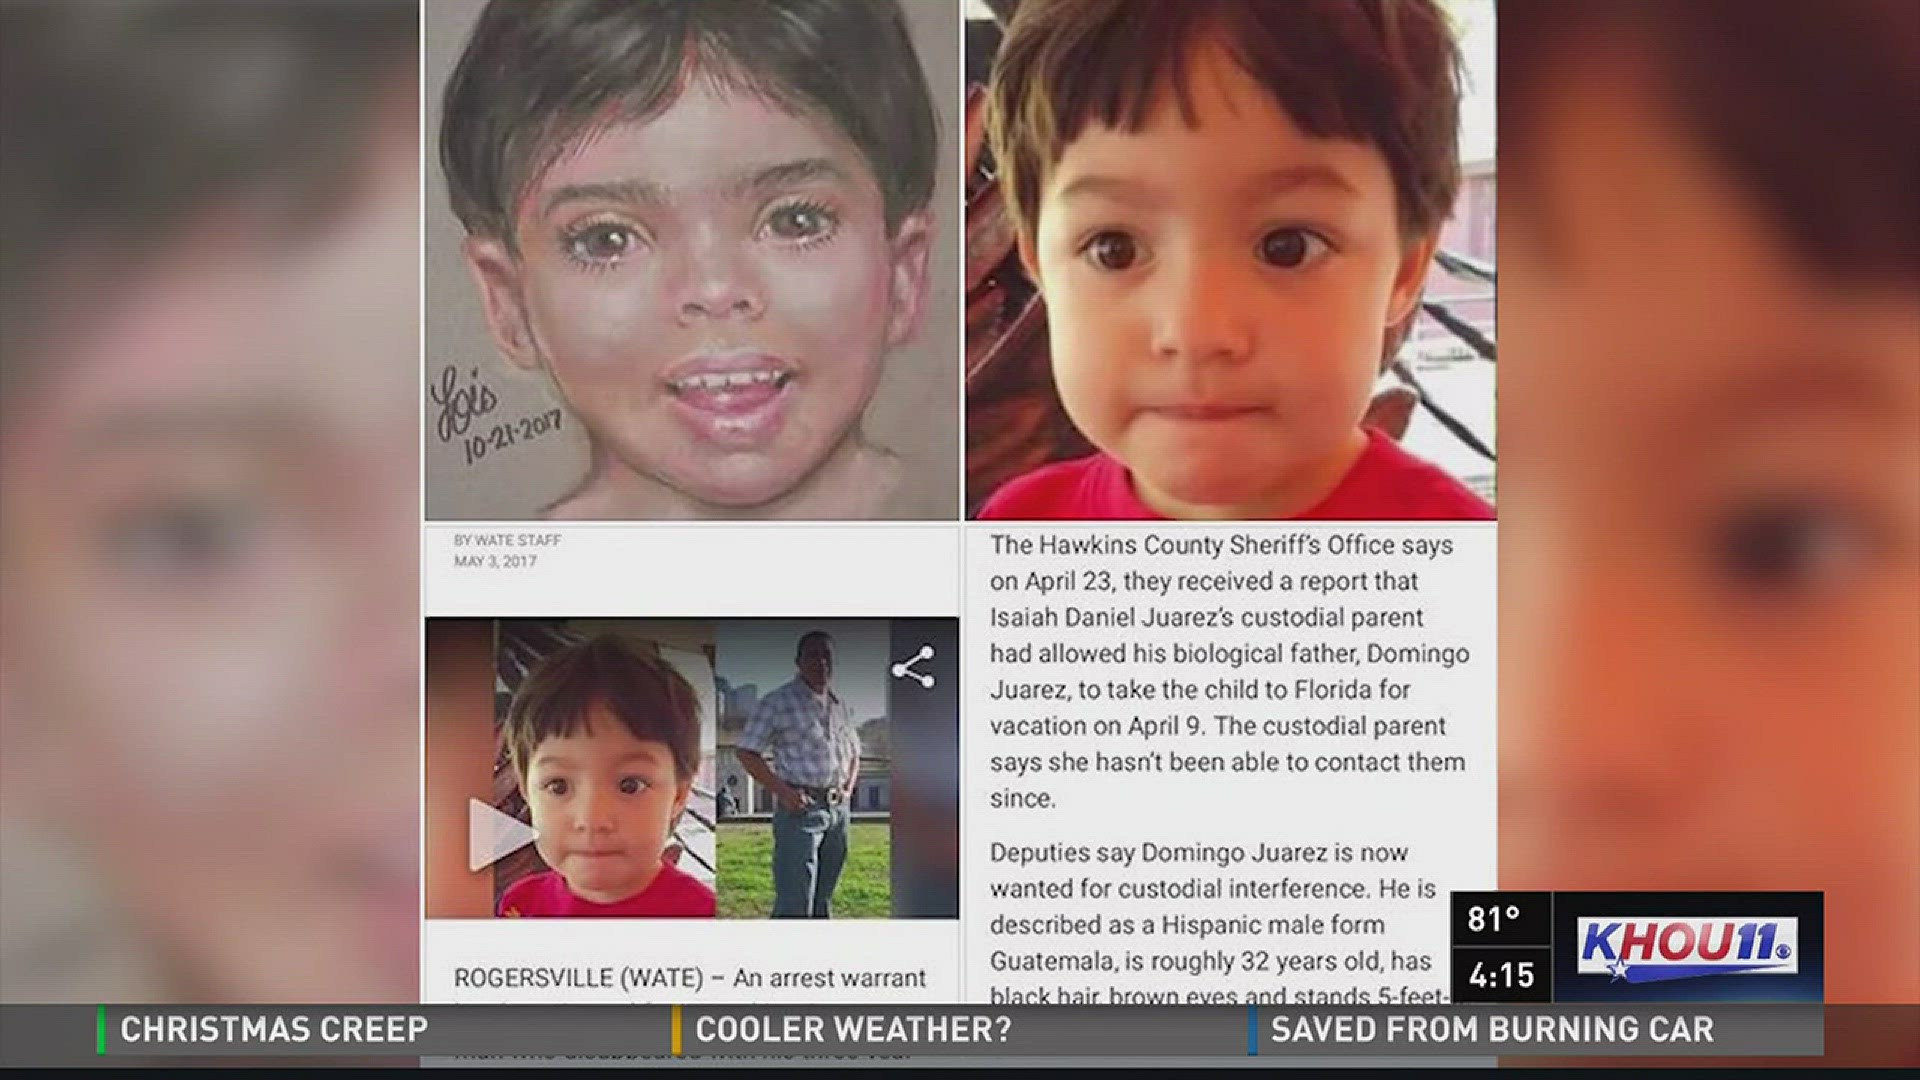 Our Verify Team looked into whether a missing boy in Tennessee could be the body of the boy found in Galveston.